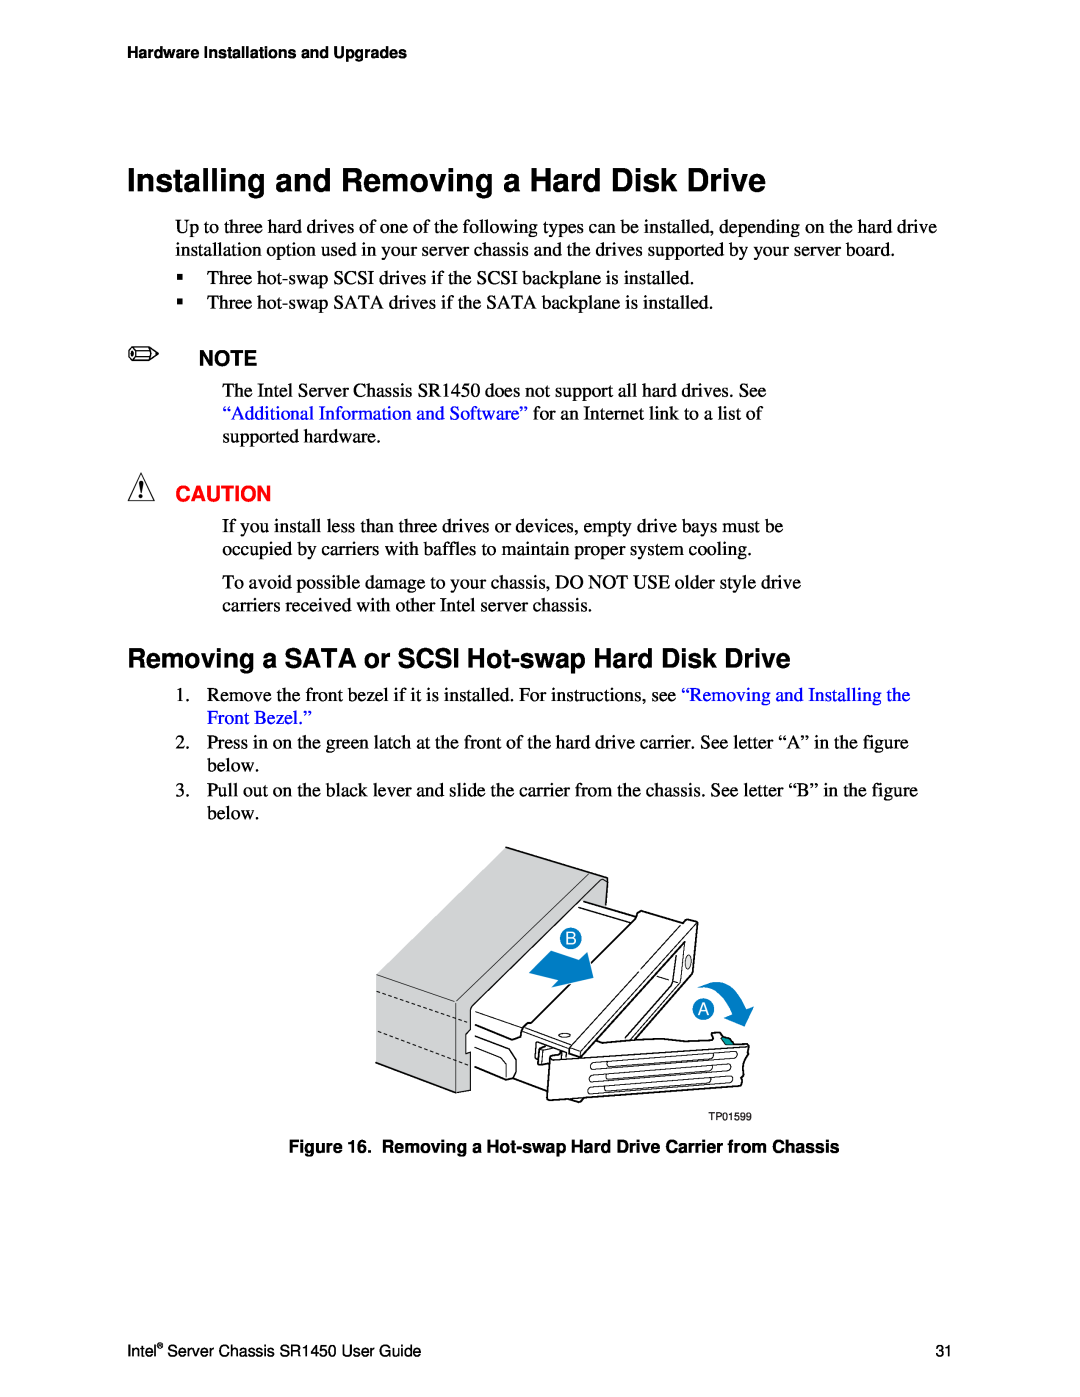 Intel SR1450 manual Installing and Removing a Hard Disk Drive, Removing a SATA or SCSI Hot-swapHard Disk Drive 